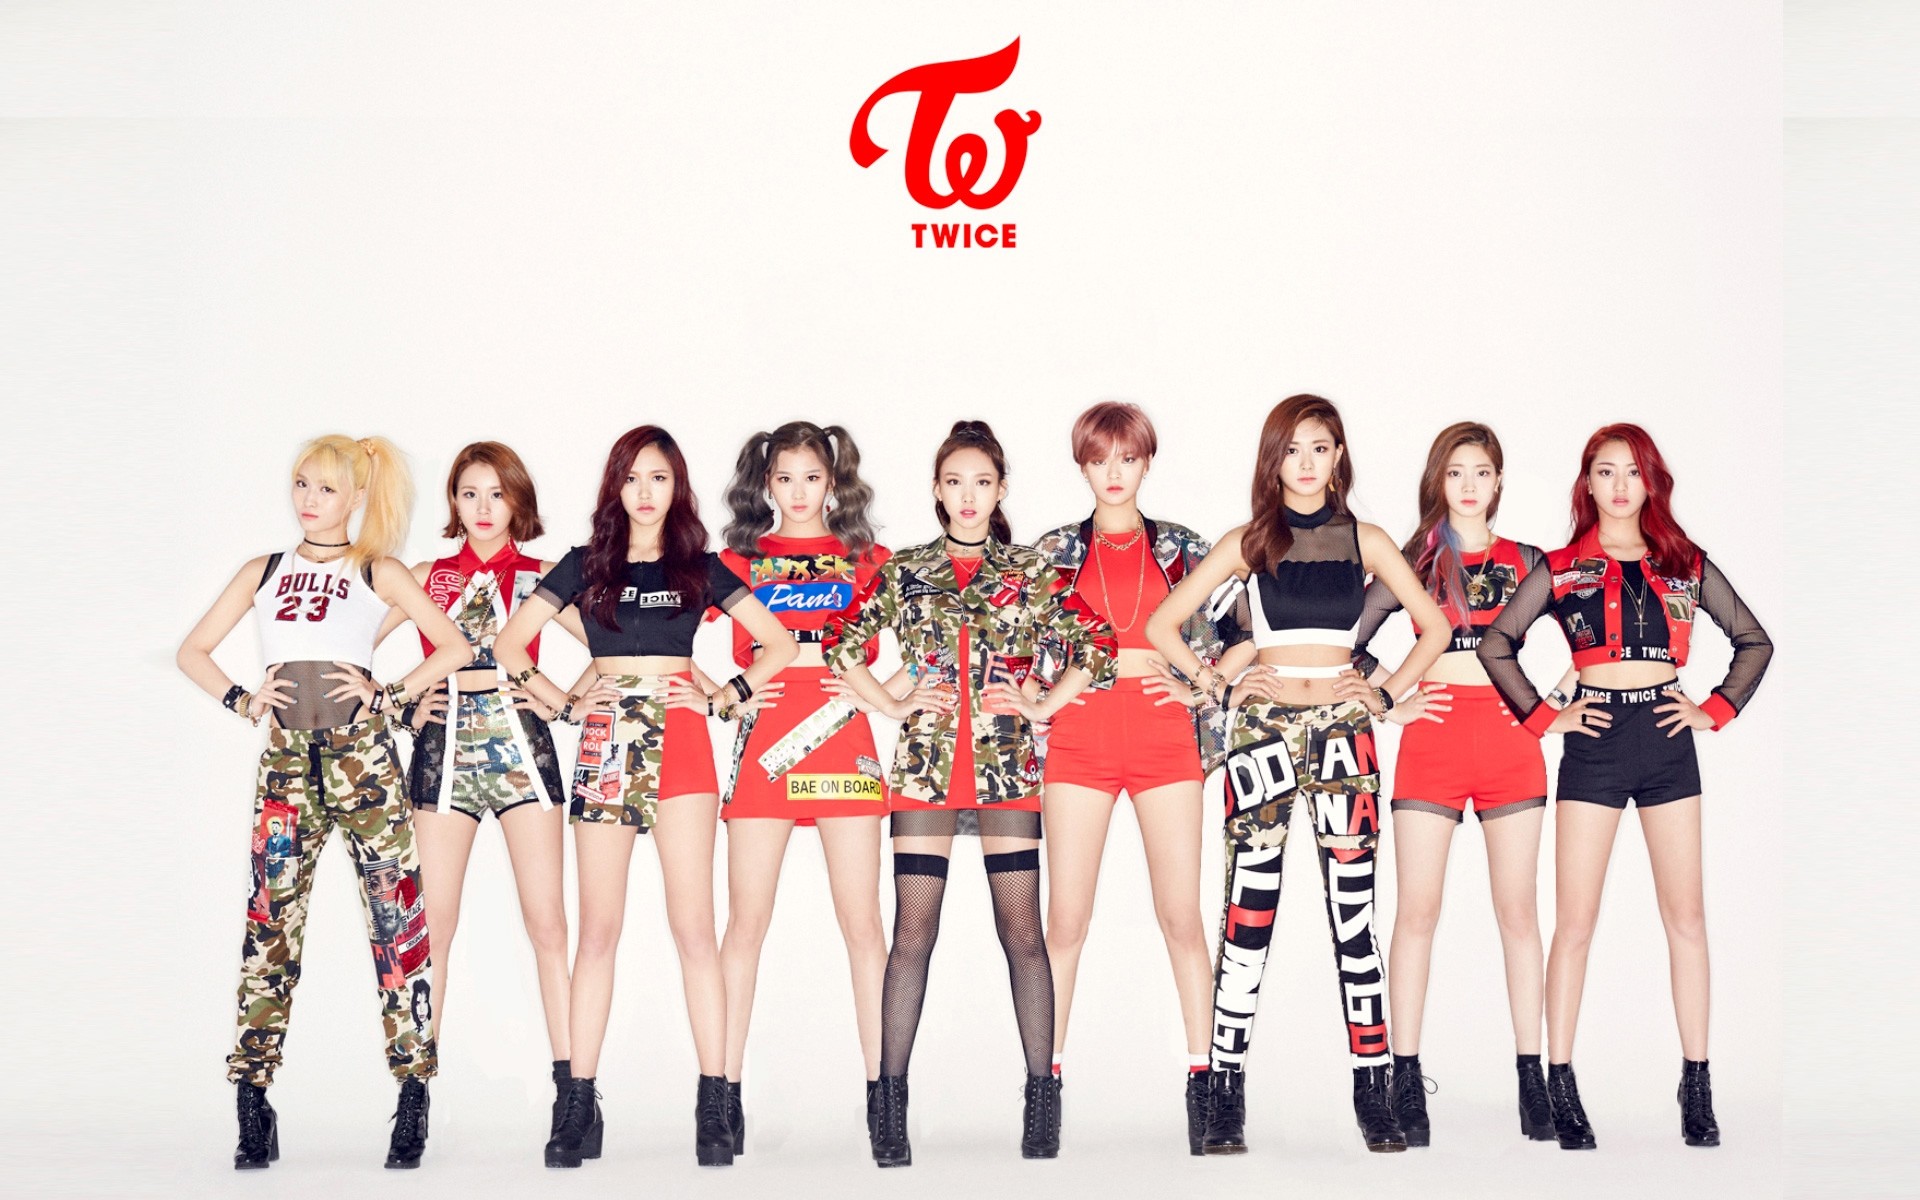 1920x1200 TWICE 1 Really love their debut and Like Ooh-Ahh. I saw someone posted  their Cheer Up Promotion image in this thread, gonna steal that hehe